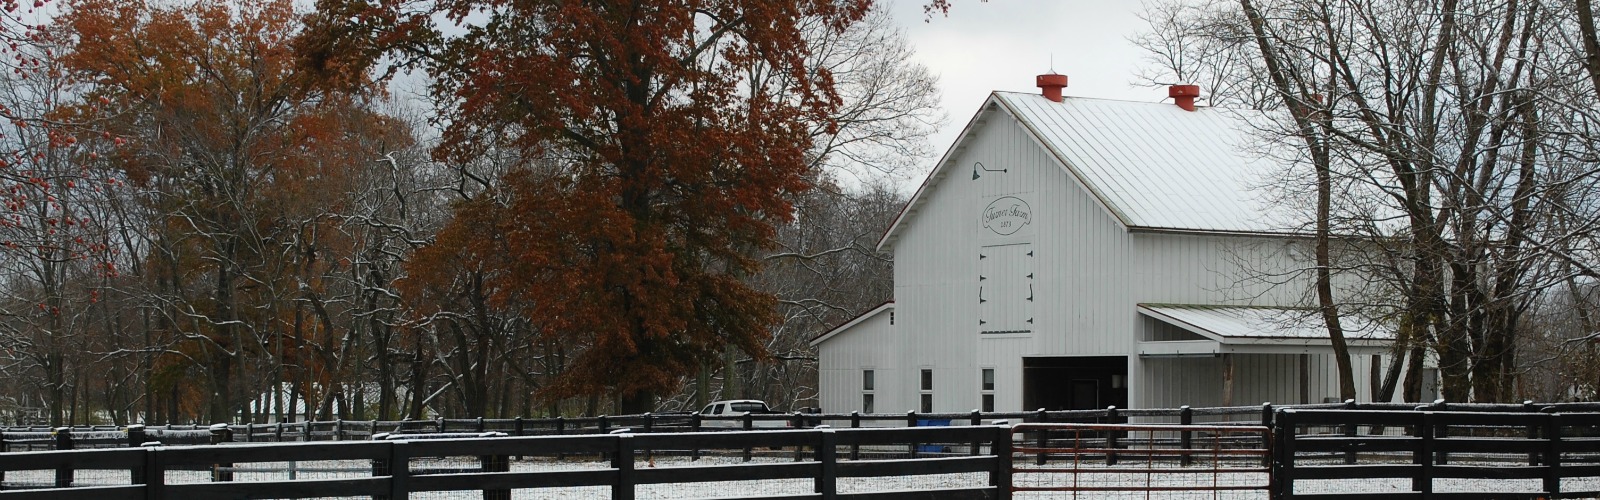 Turner Farm is one of three working farms left in Indian Hill.